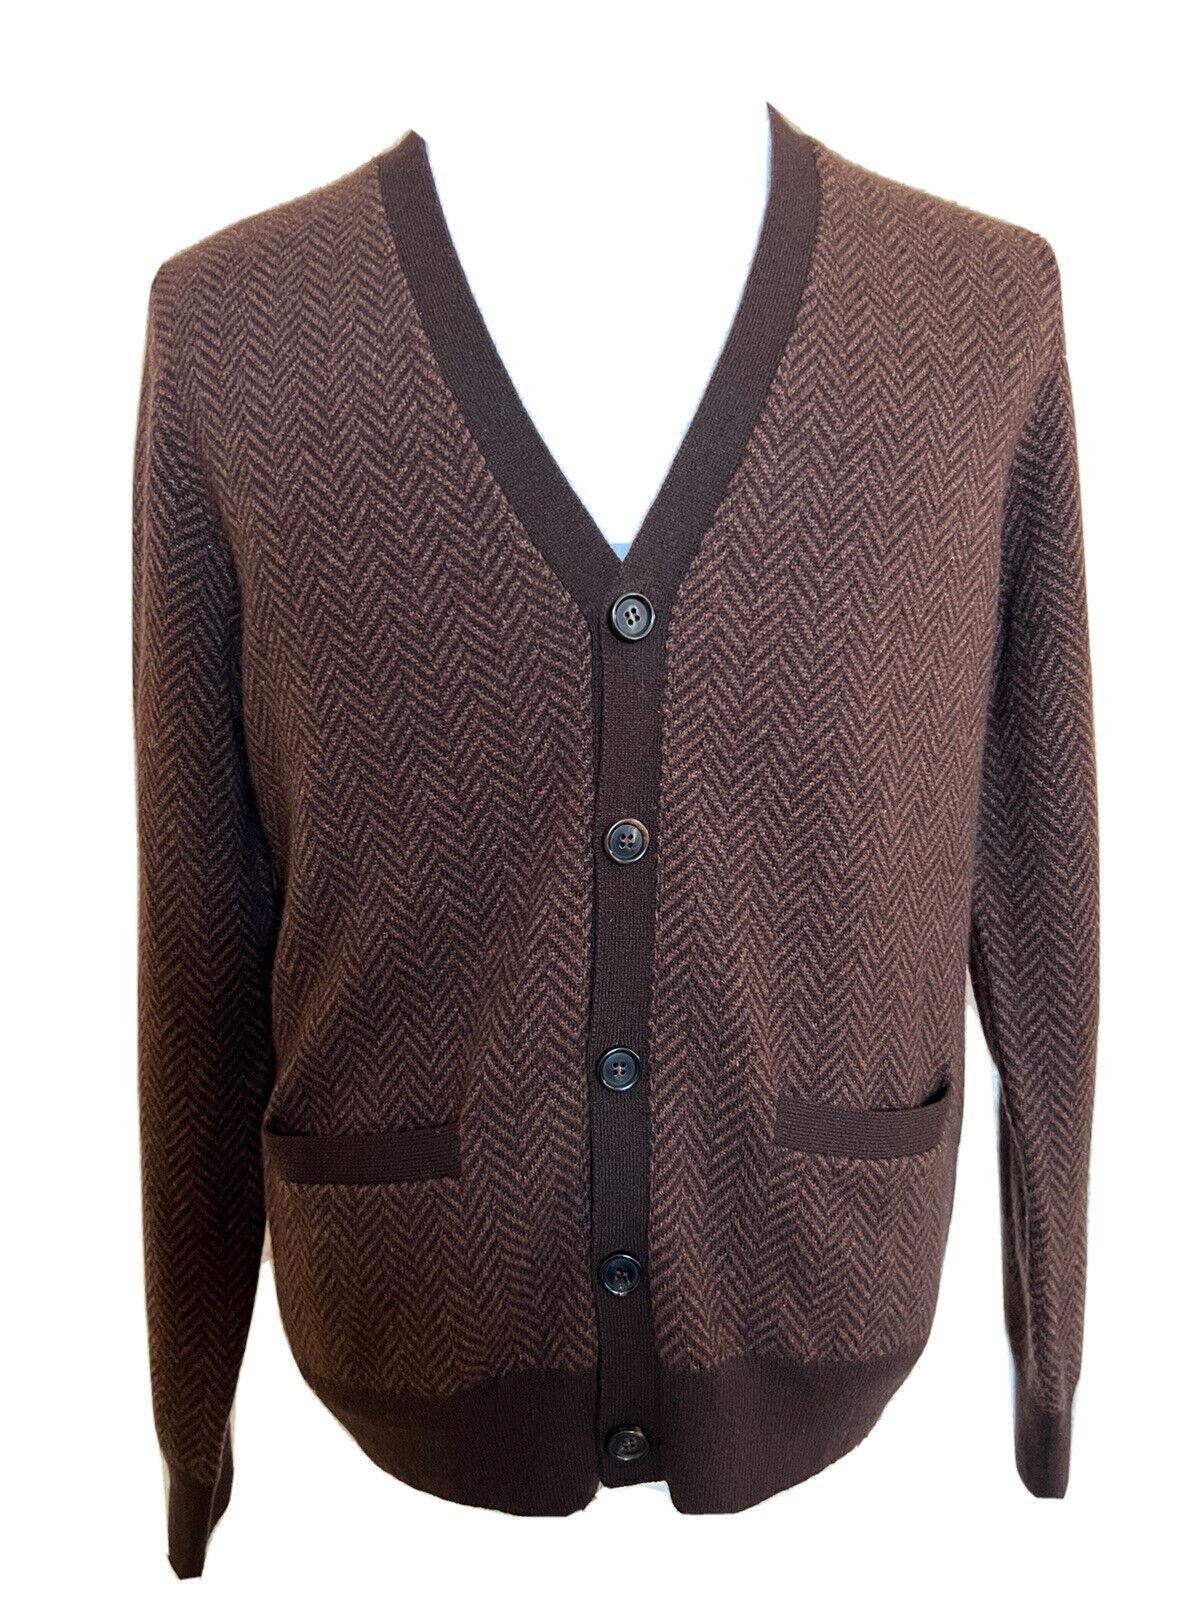 NWT $1695 Ralph Lauren Purple Label Cashmere Brown Cardigan L Made in Italy